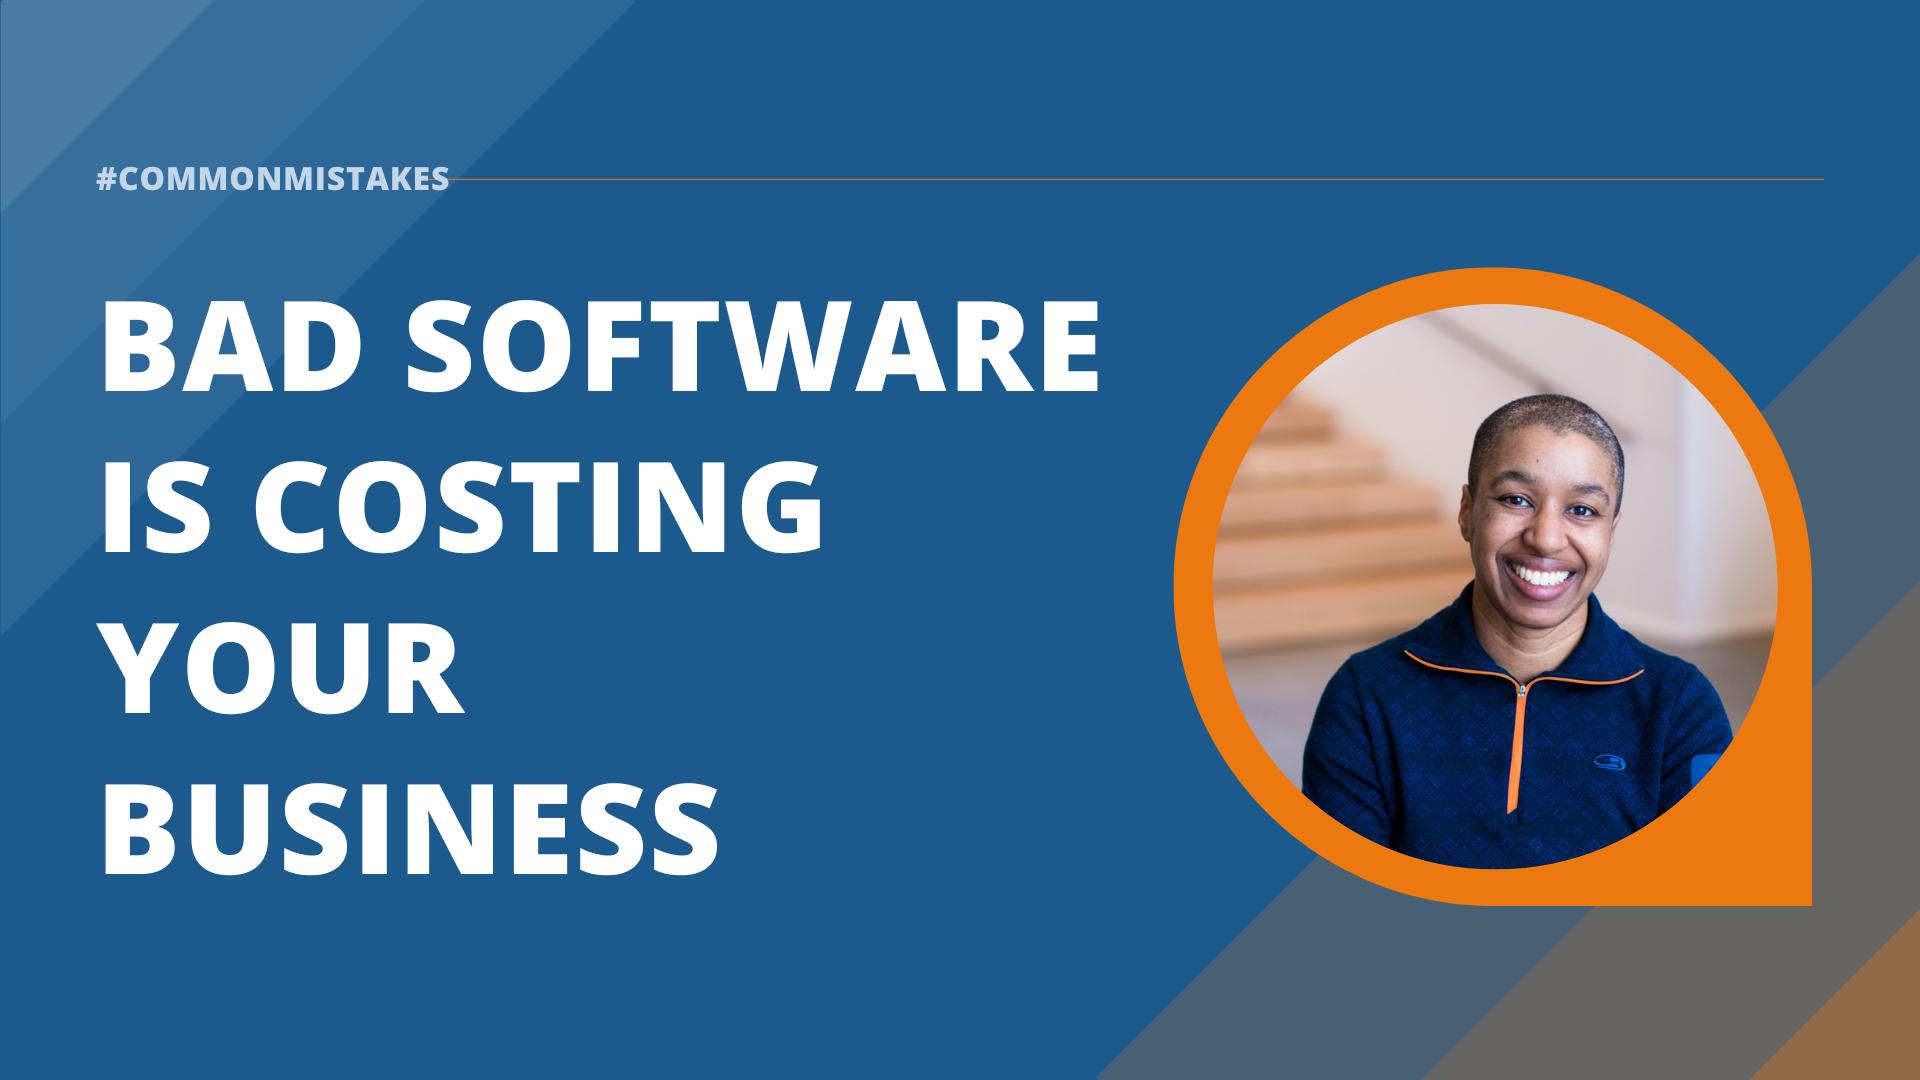 Bad Software is Costing Your Business